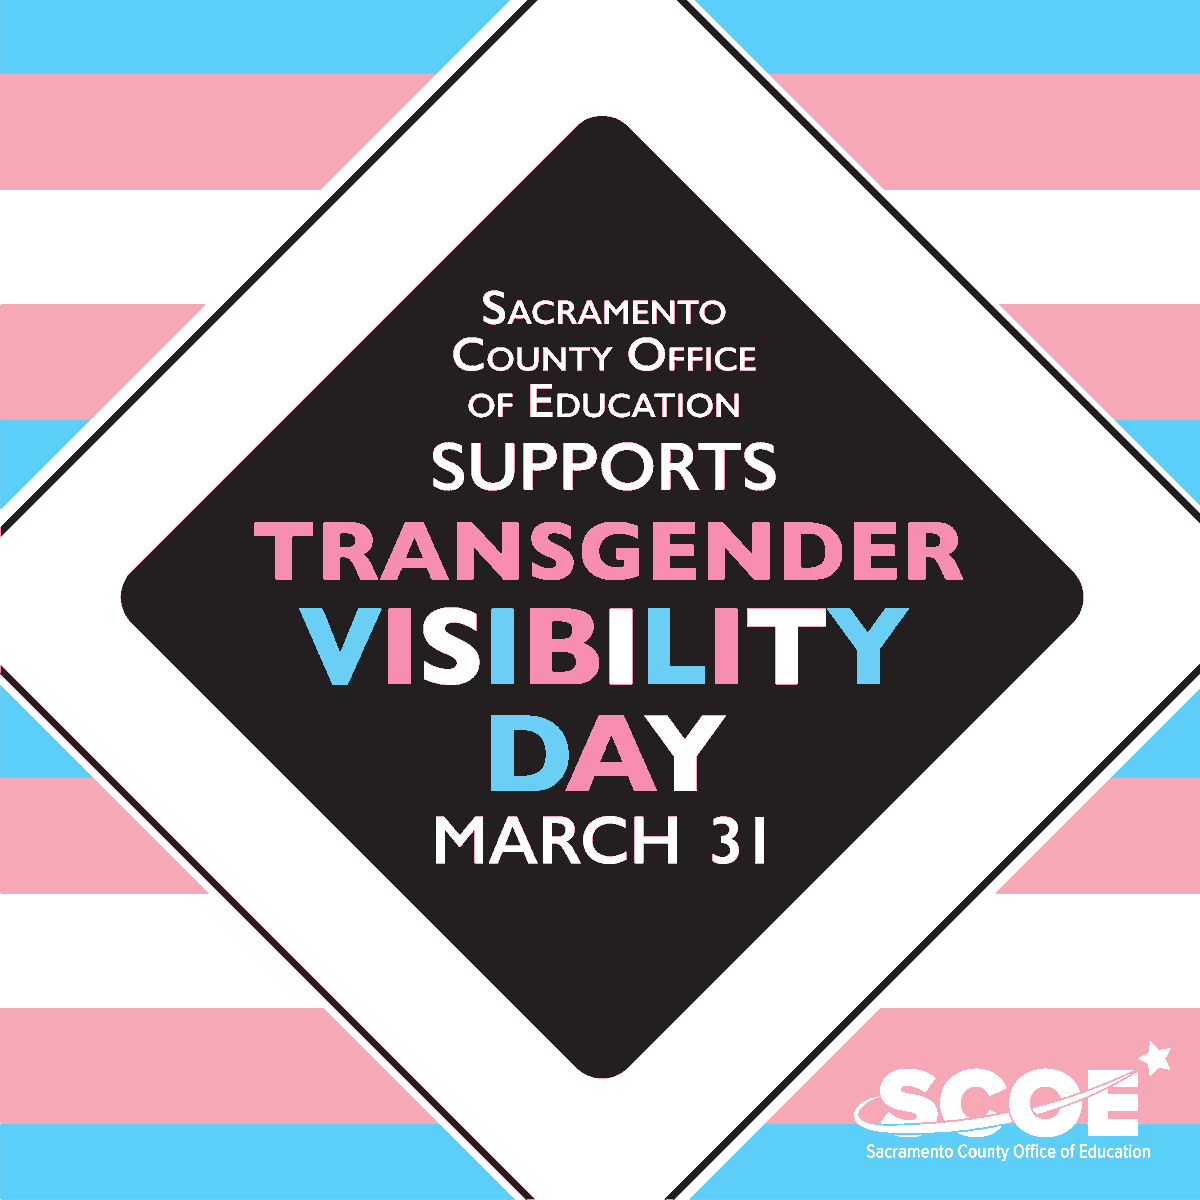 The Sacramento County Office of Education is proud to support Transgender Day of Visibility (#TDOV). Explore these linked resources to learn more about the experiences of transgender people and how to be a supportive ally: ow.ly/ne2250R5rIi